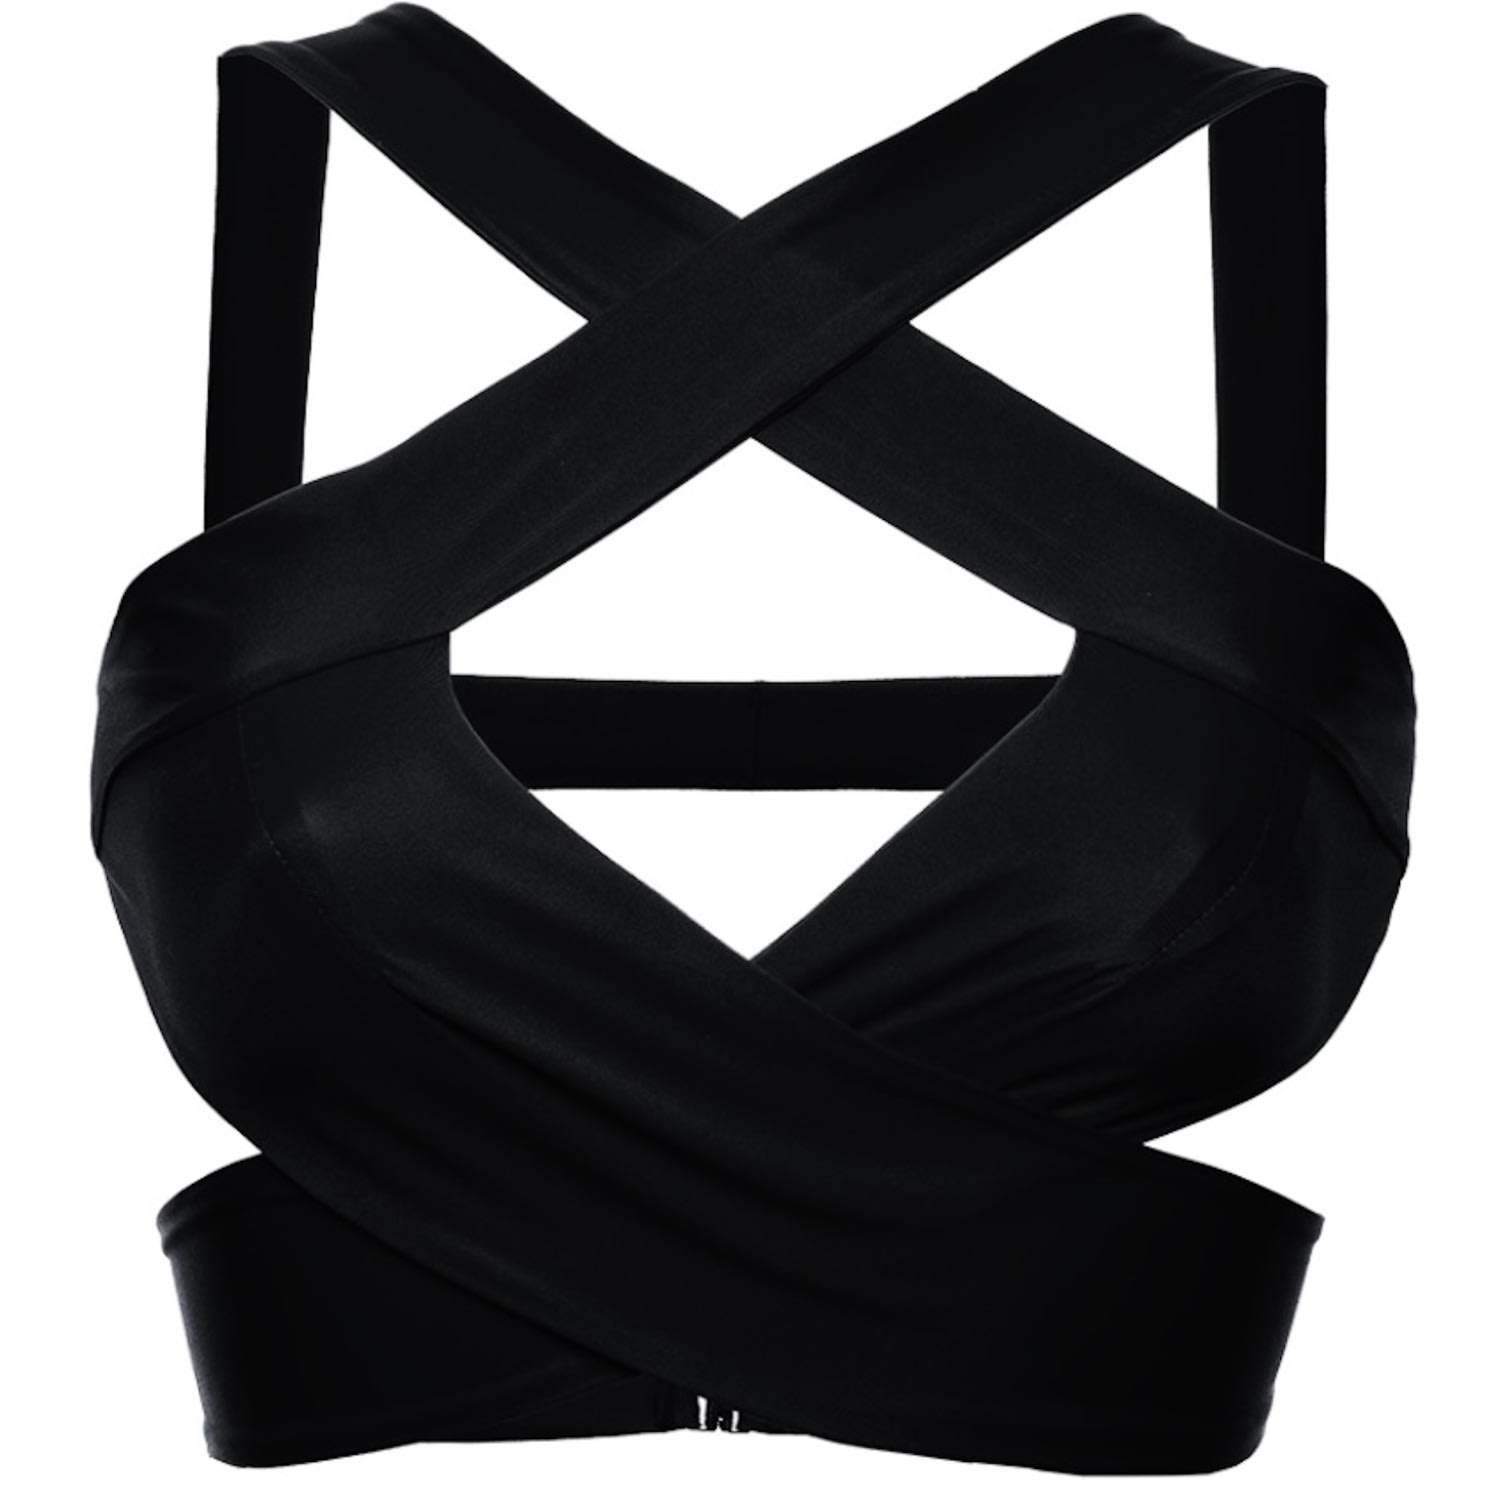 Women’s X Top - Black /With Pad Pockets/ Small Fanna - the Brand for Conscious Women